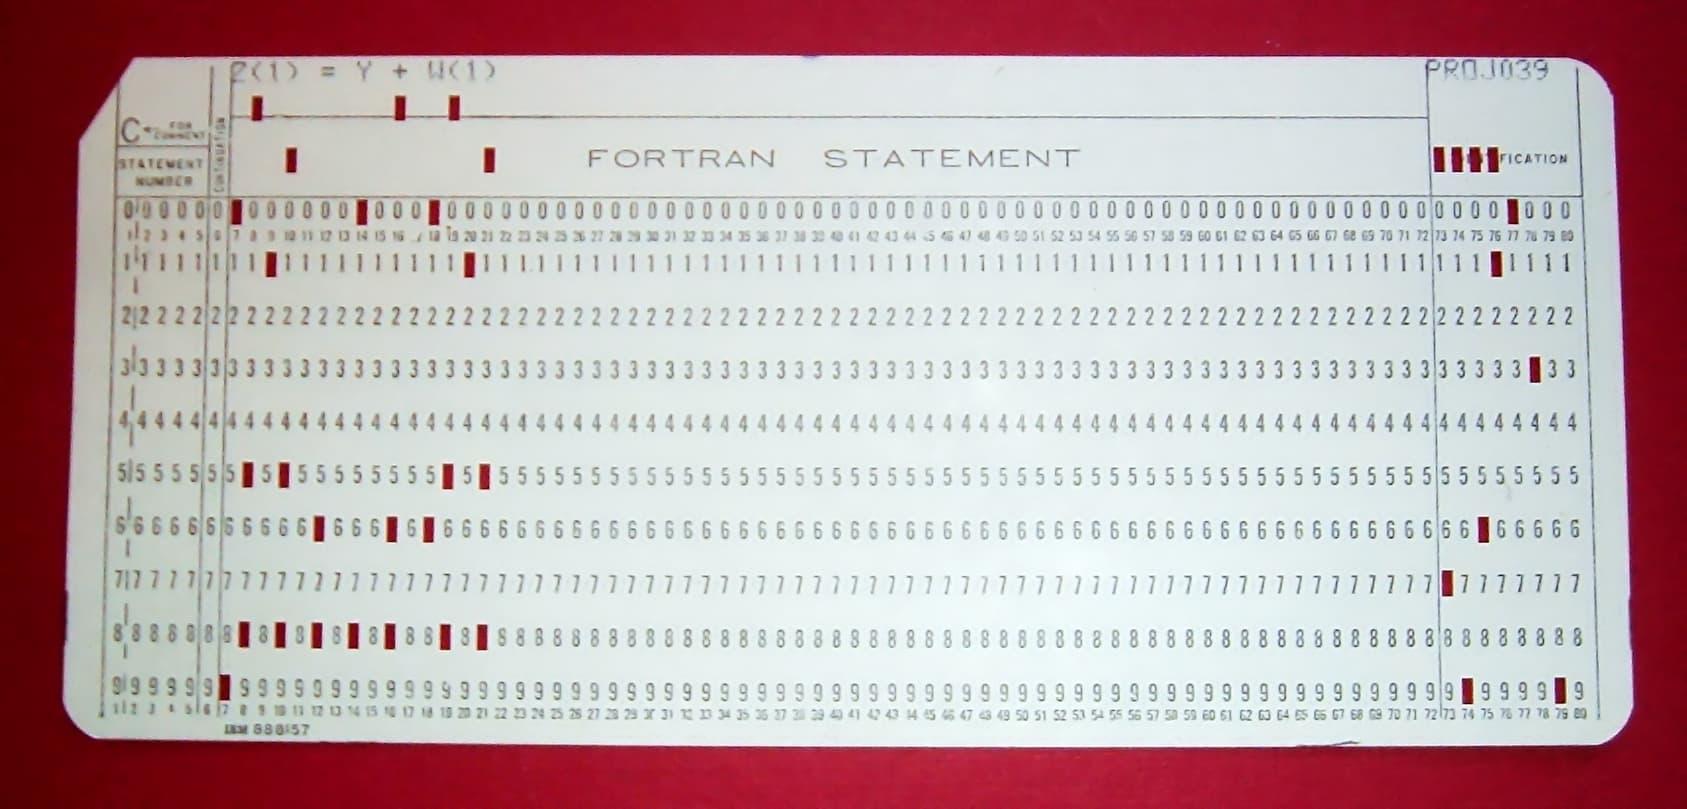 A rectangular paper card with rows of numbers and small rectangular holes, with the name FORTRAN STATEMENT at the top